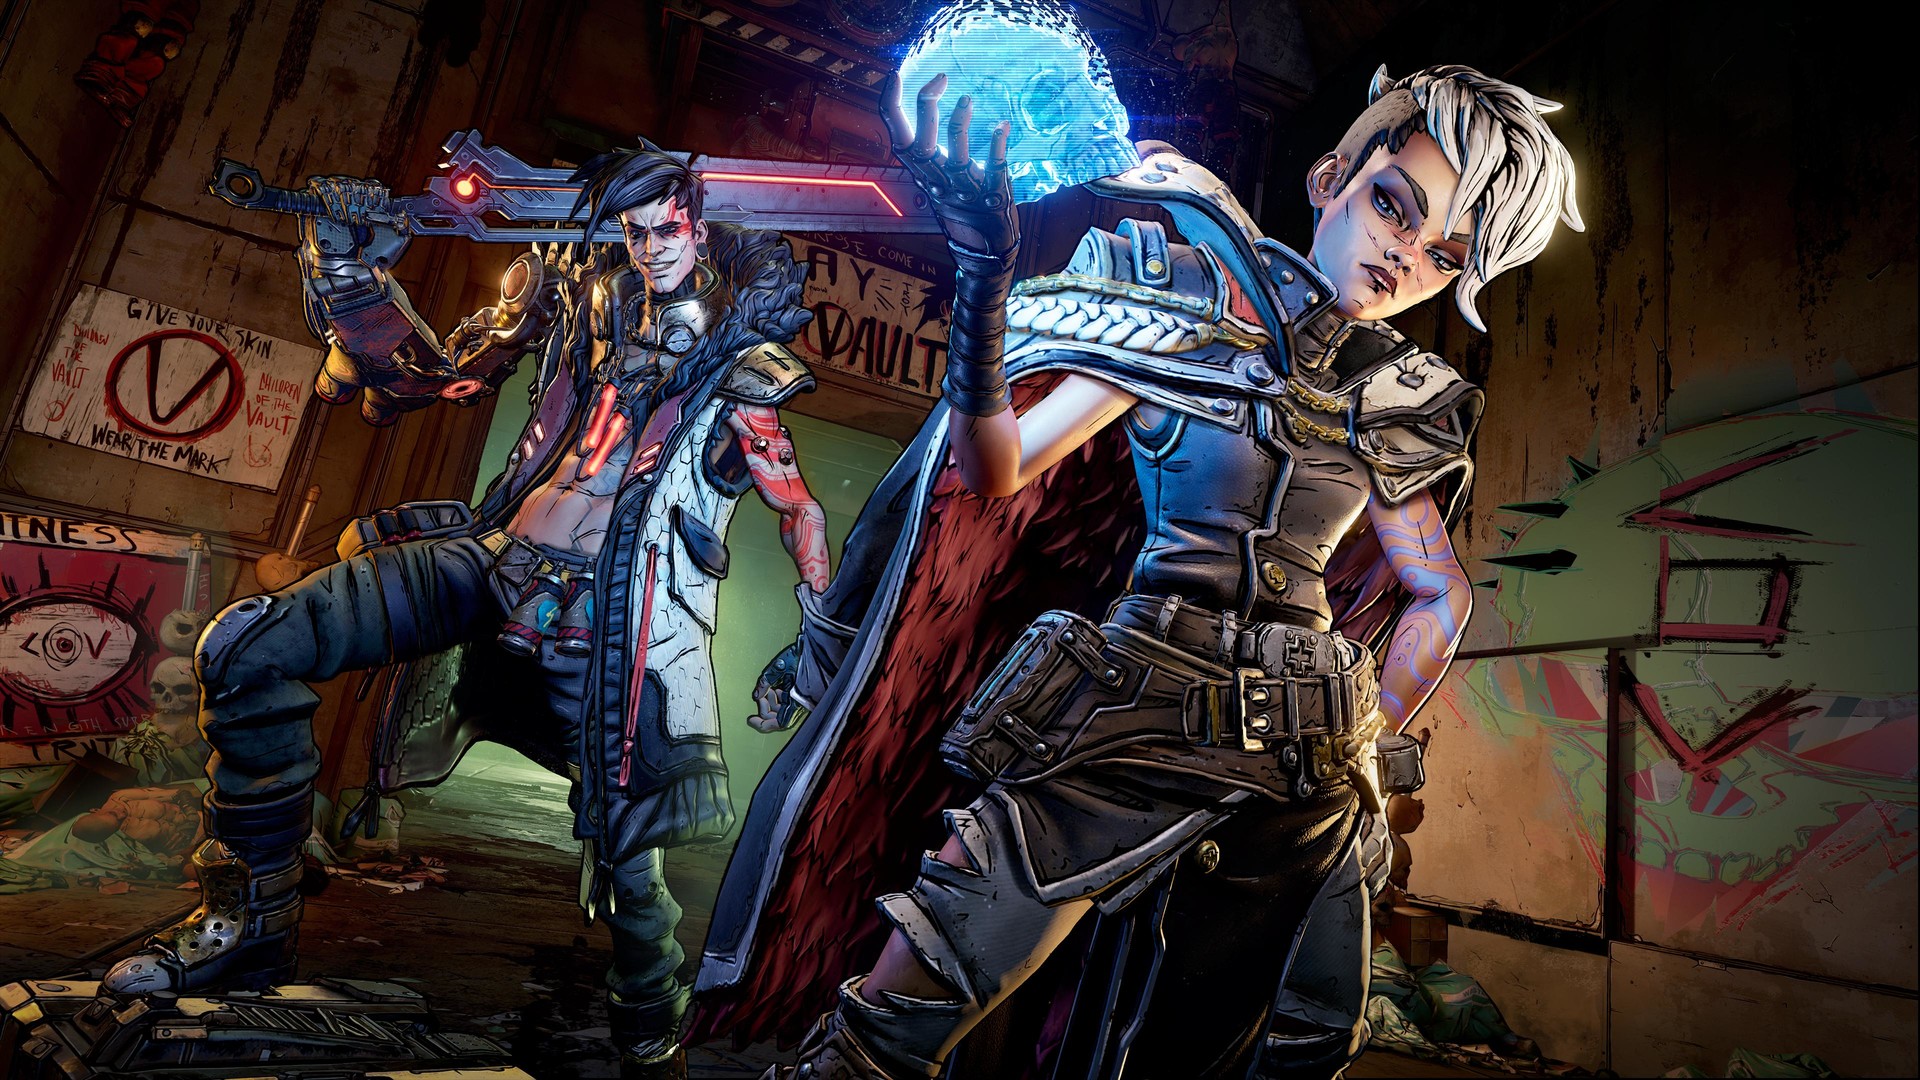 Borderlands 3 Is Celebrating the Second Anniversary With Special Events – Gameranx